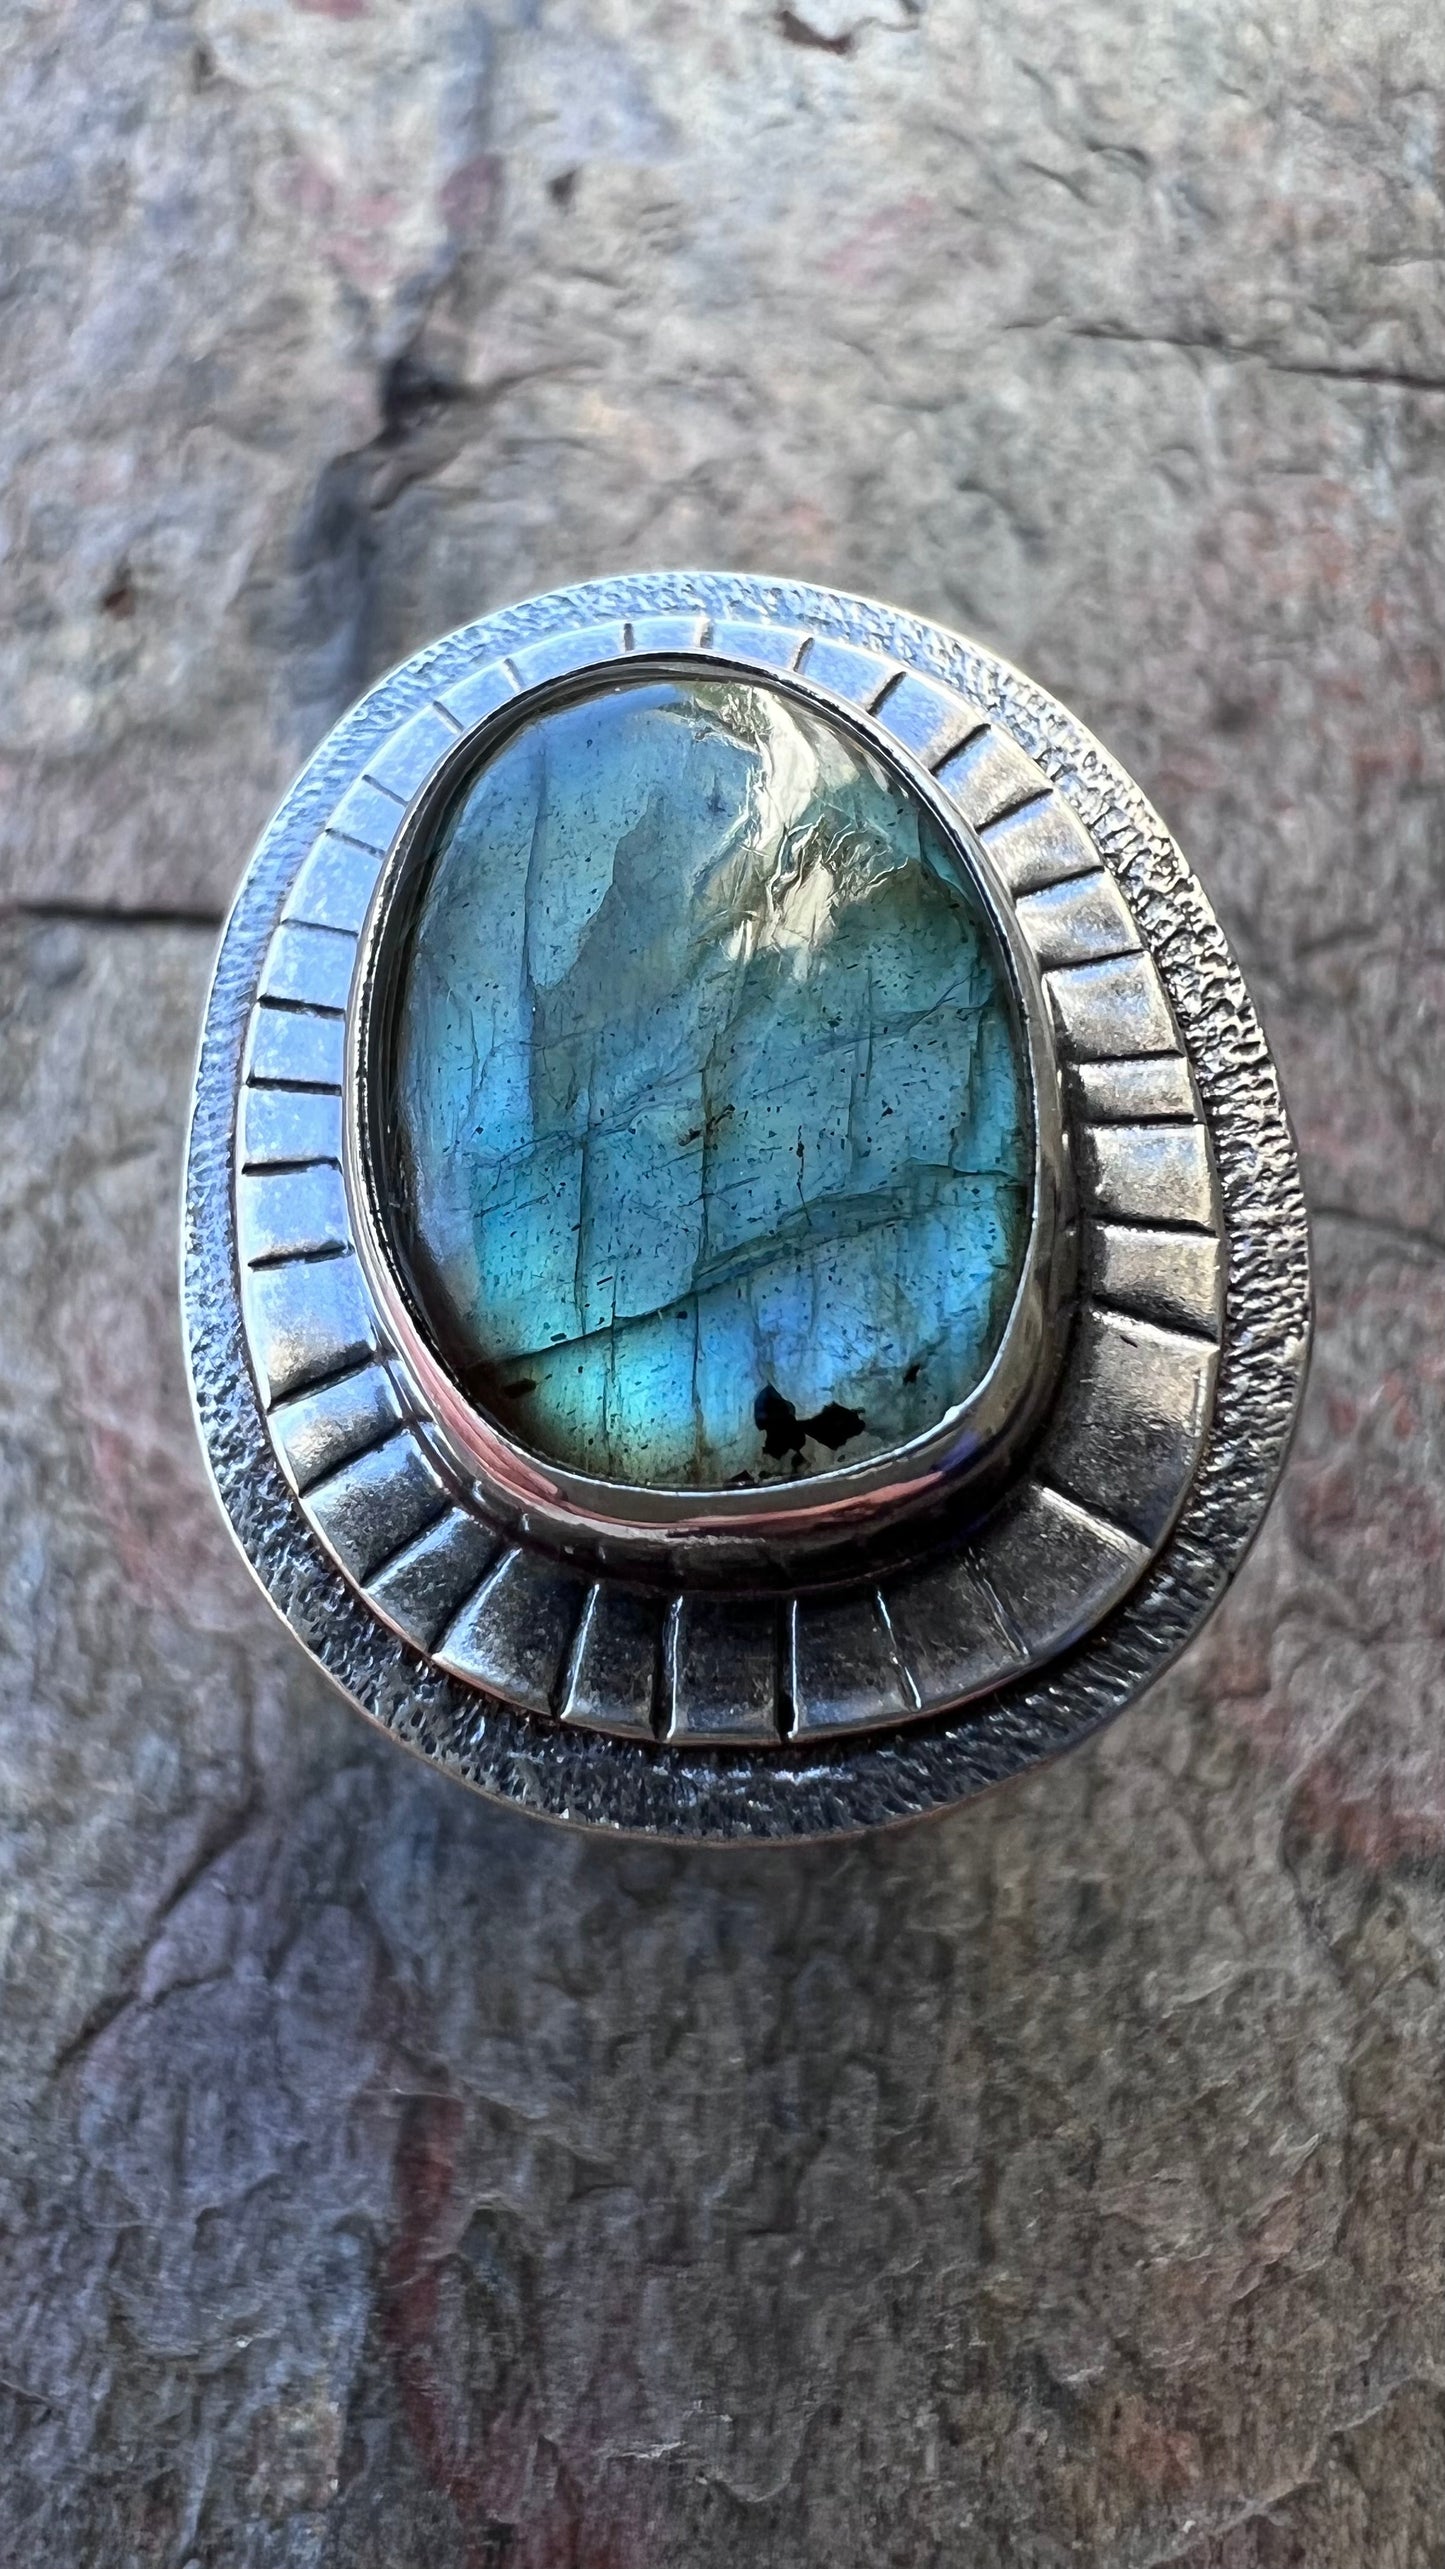 Labradorite Sterling Silver Ring - Handmade One-of-a-kind Labradorite Statement Ring on Hammered Silver Band - Size 10